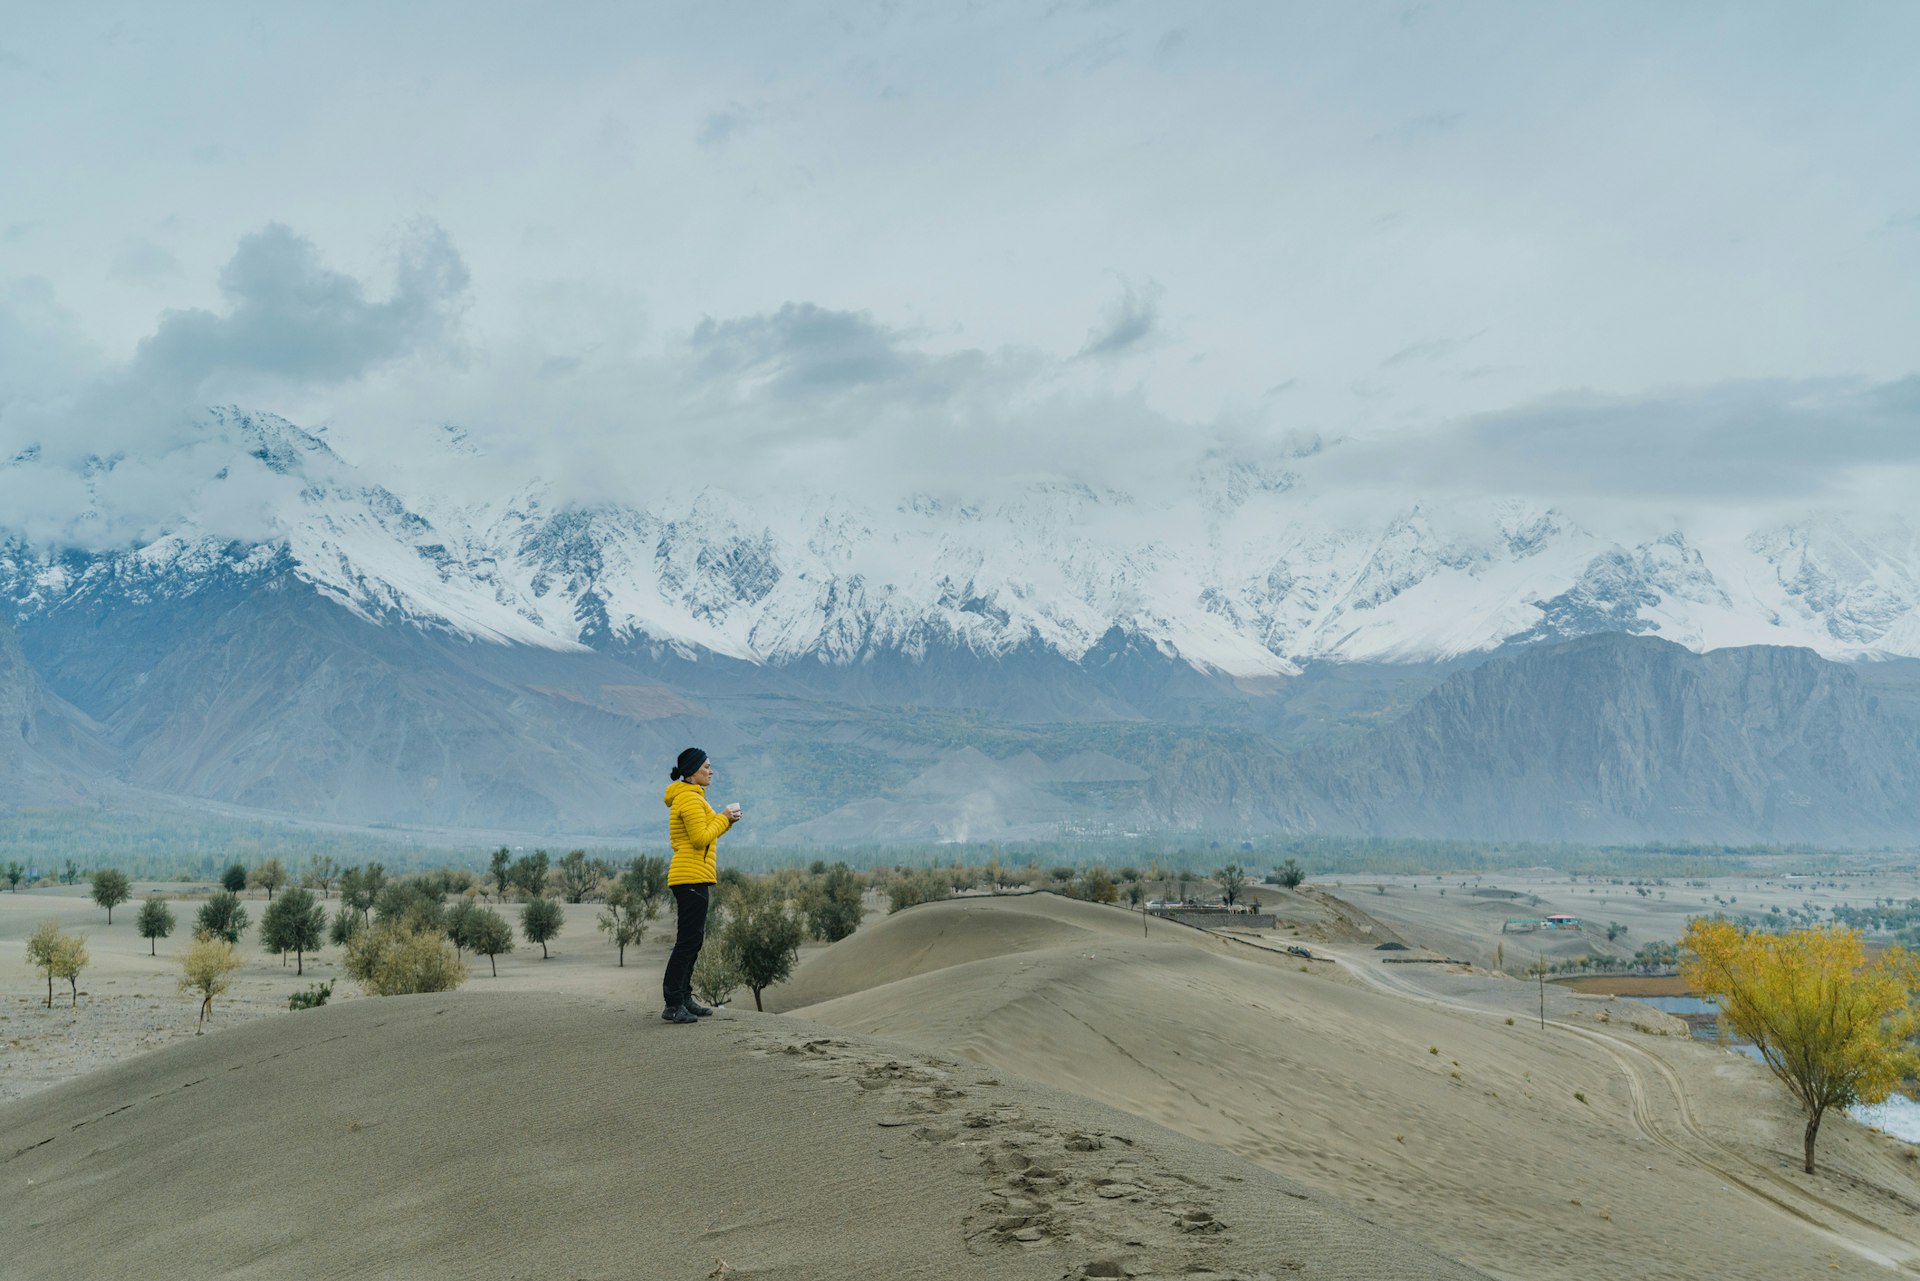 A woman stands on a sandy plain with a range of snowcapped mountains rising in the distance